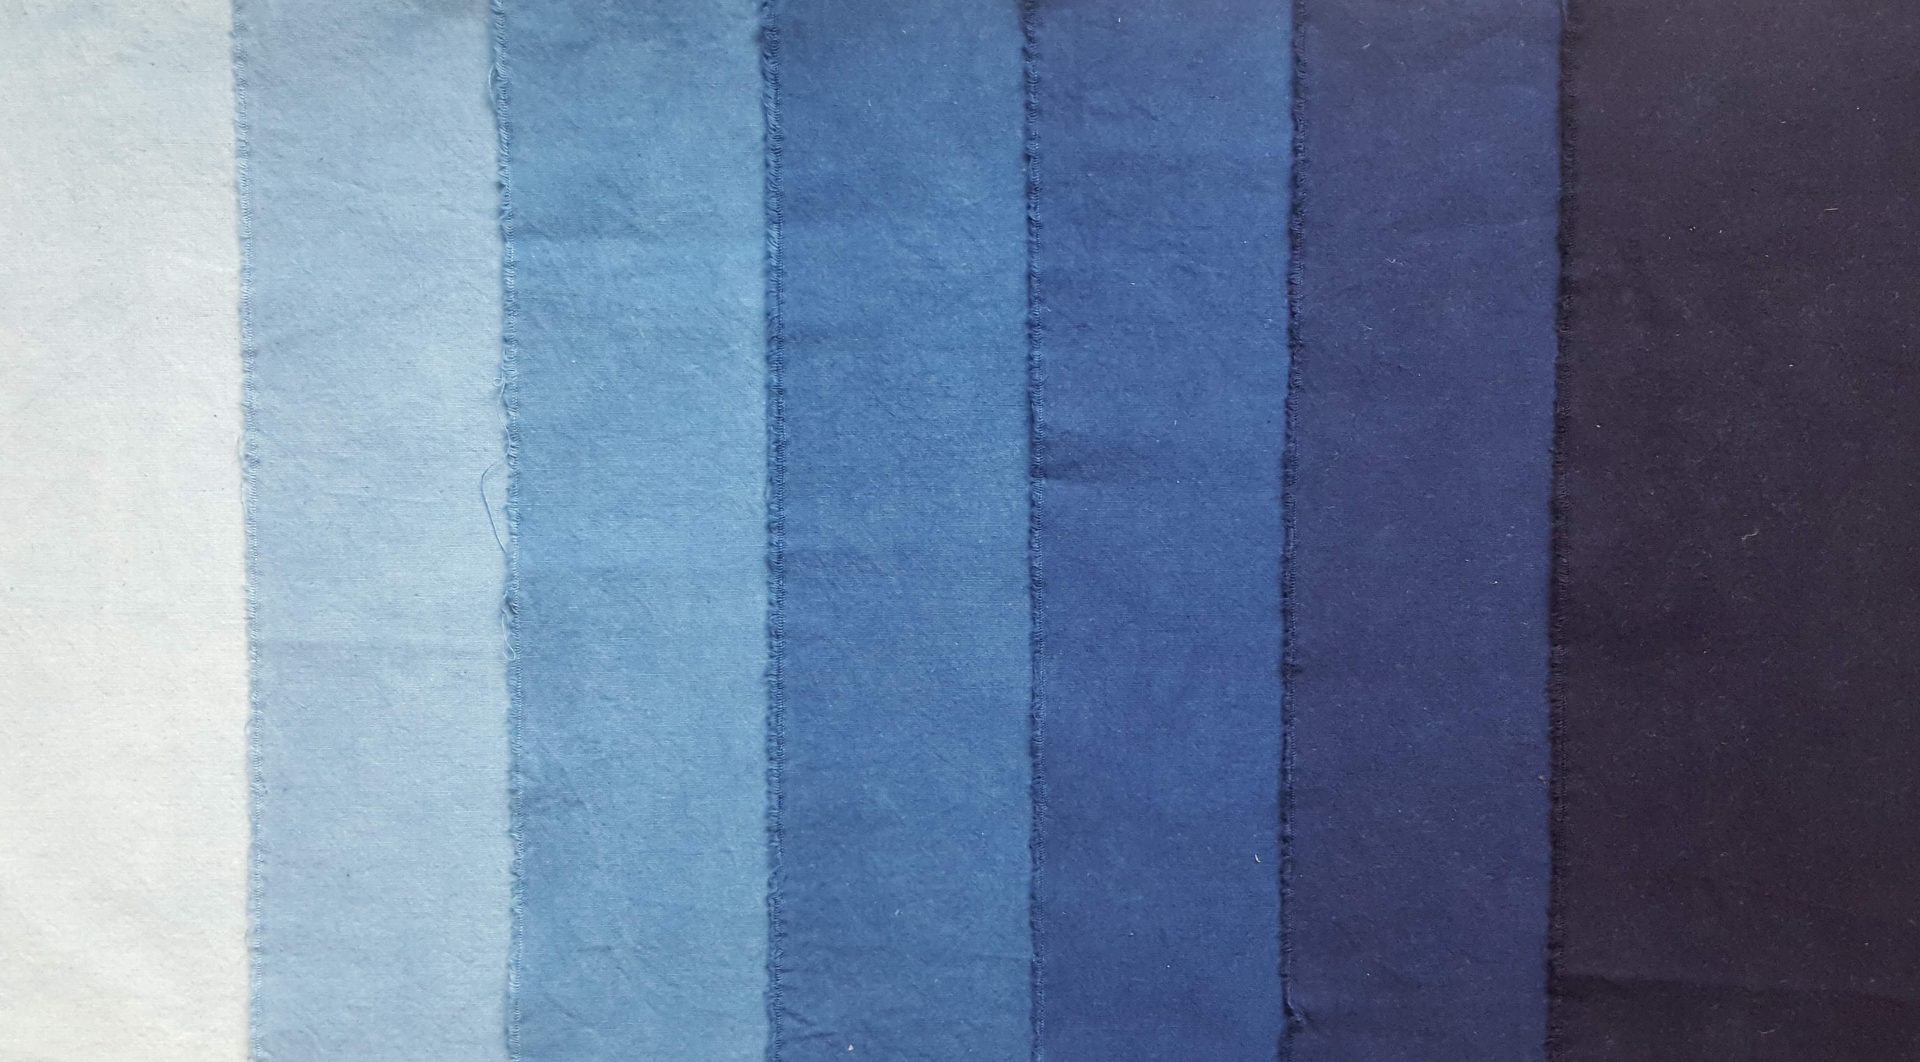 Seven swatches of blue fabric from very pale on the left to dark navy blue on the right